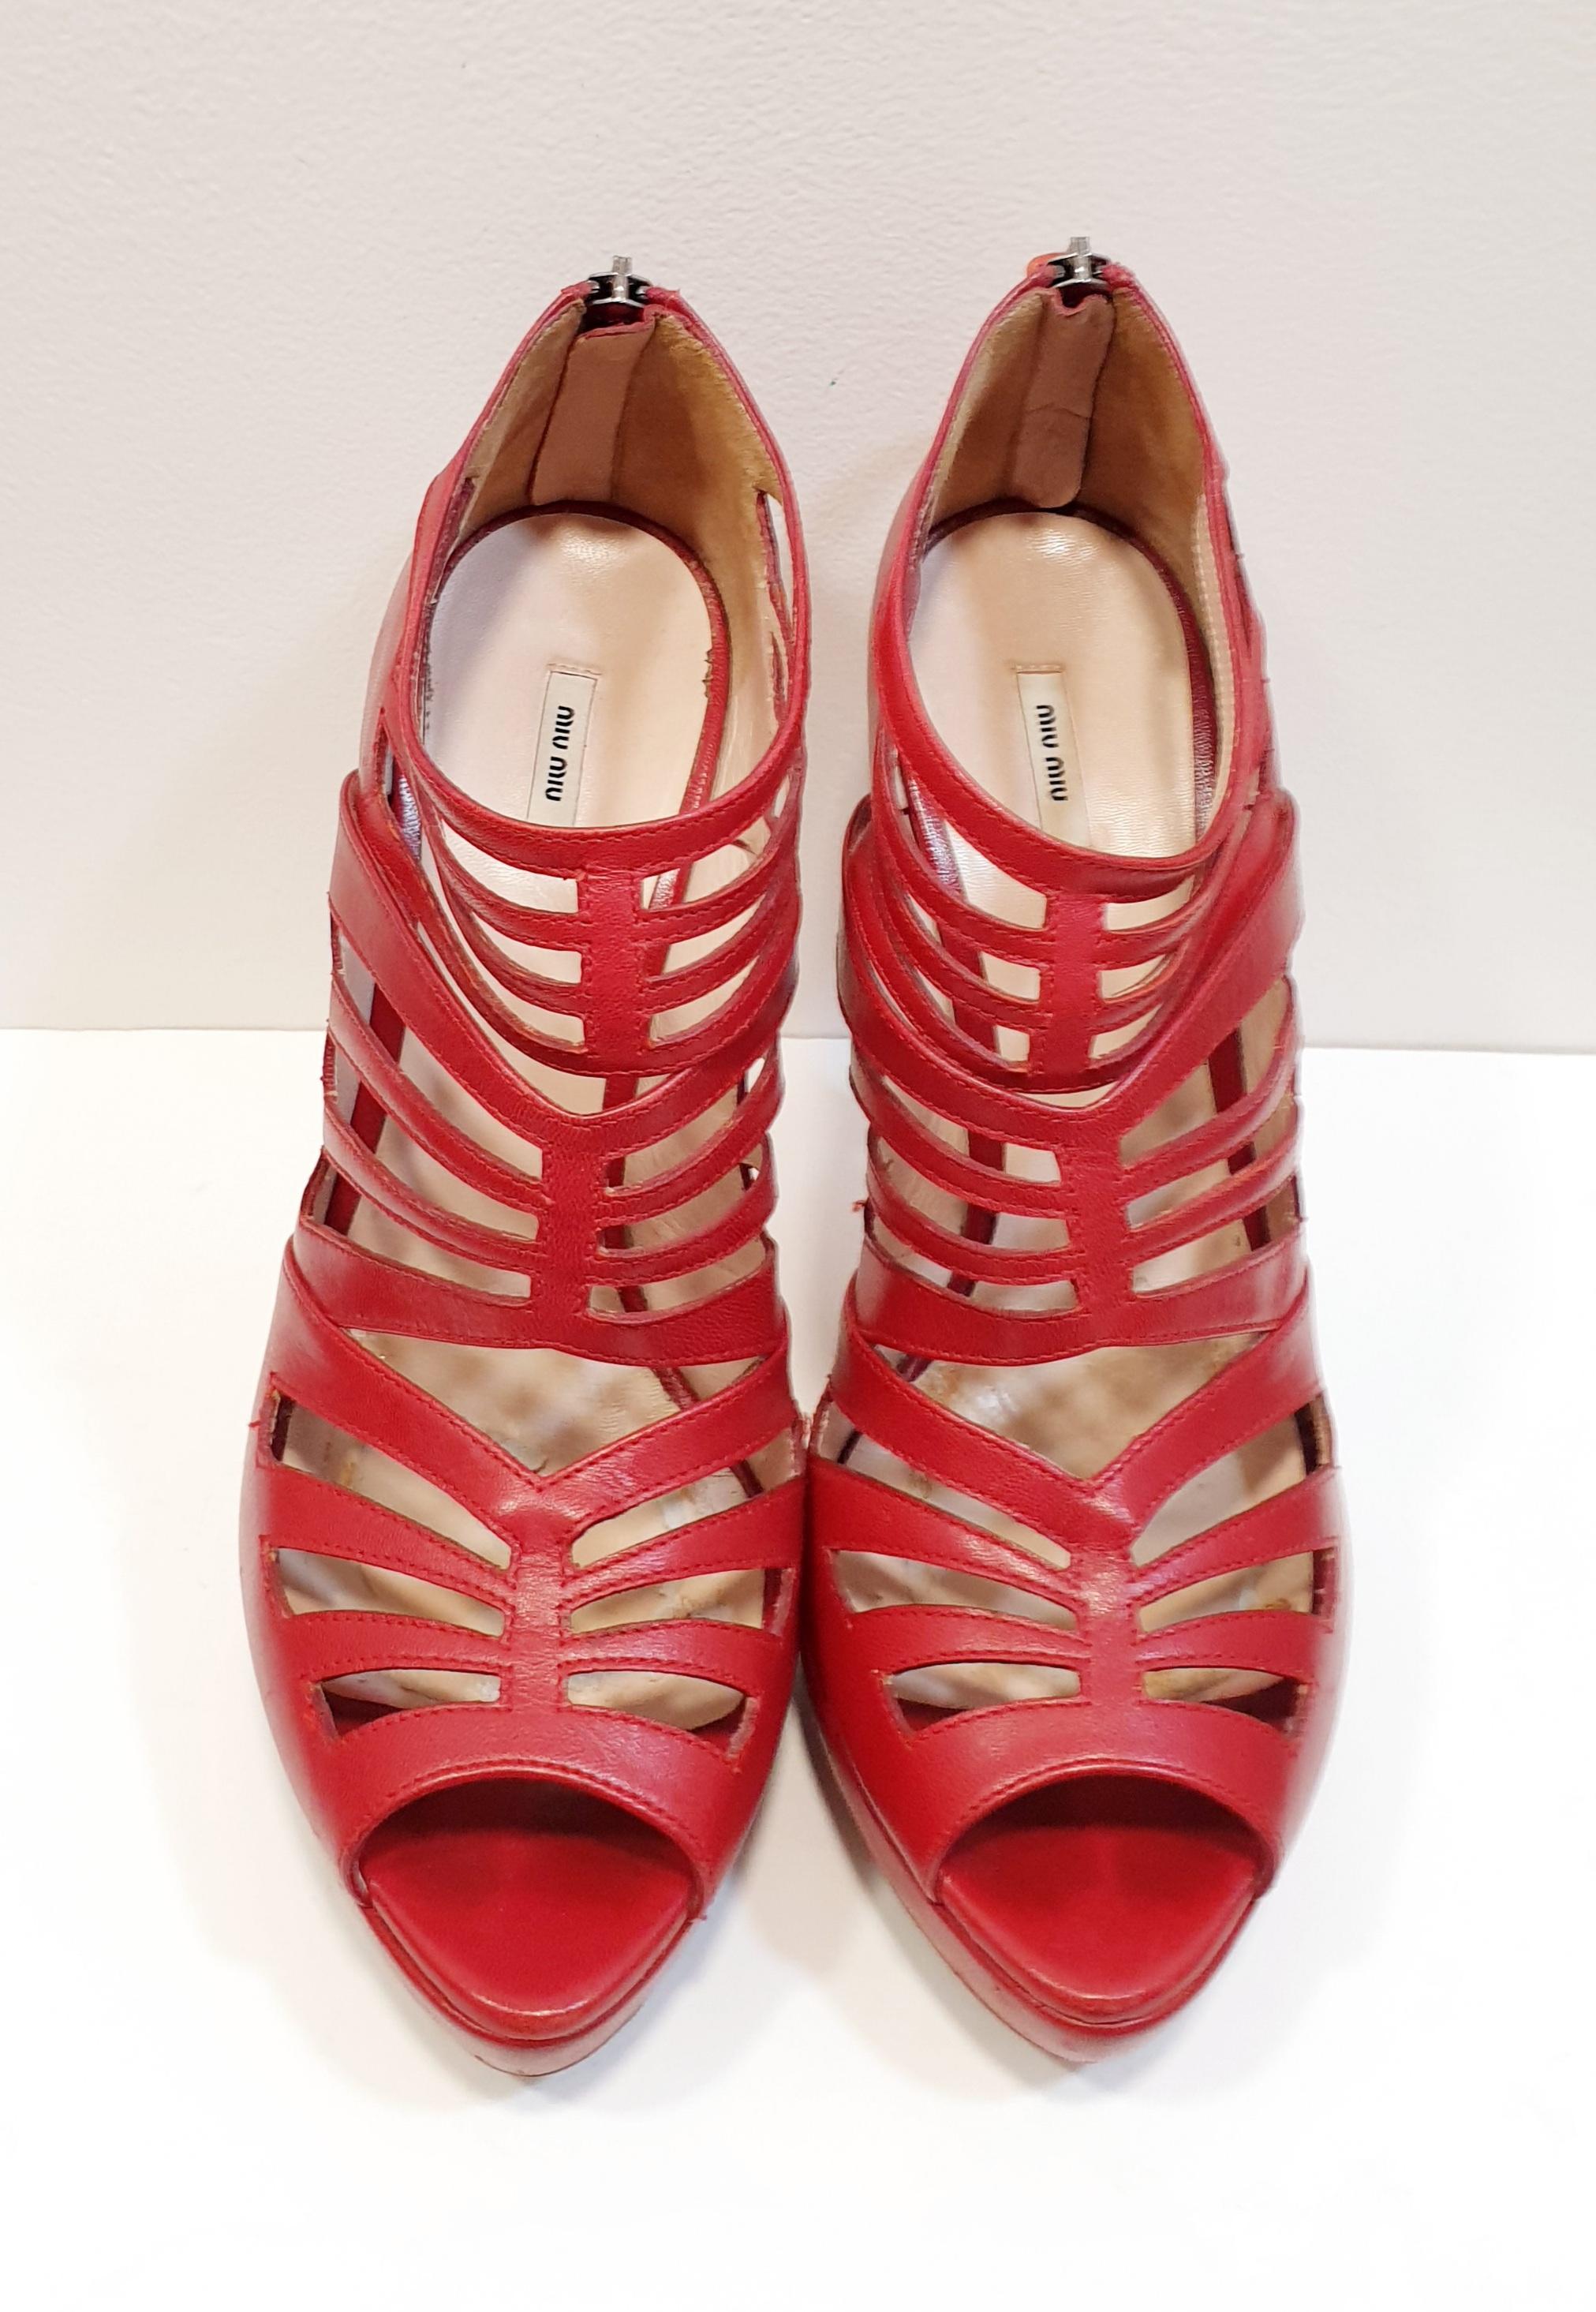 Red Open Toe Stiletto Shoe by Miu Miu
Soles will be set brand new for good and waterproof. 
Year 2006
The original box is not available.
Miu Miu is the most unrestrained portrayal of Miuccia Prada’s creativity. Intentionally far from traditional